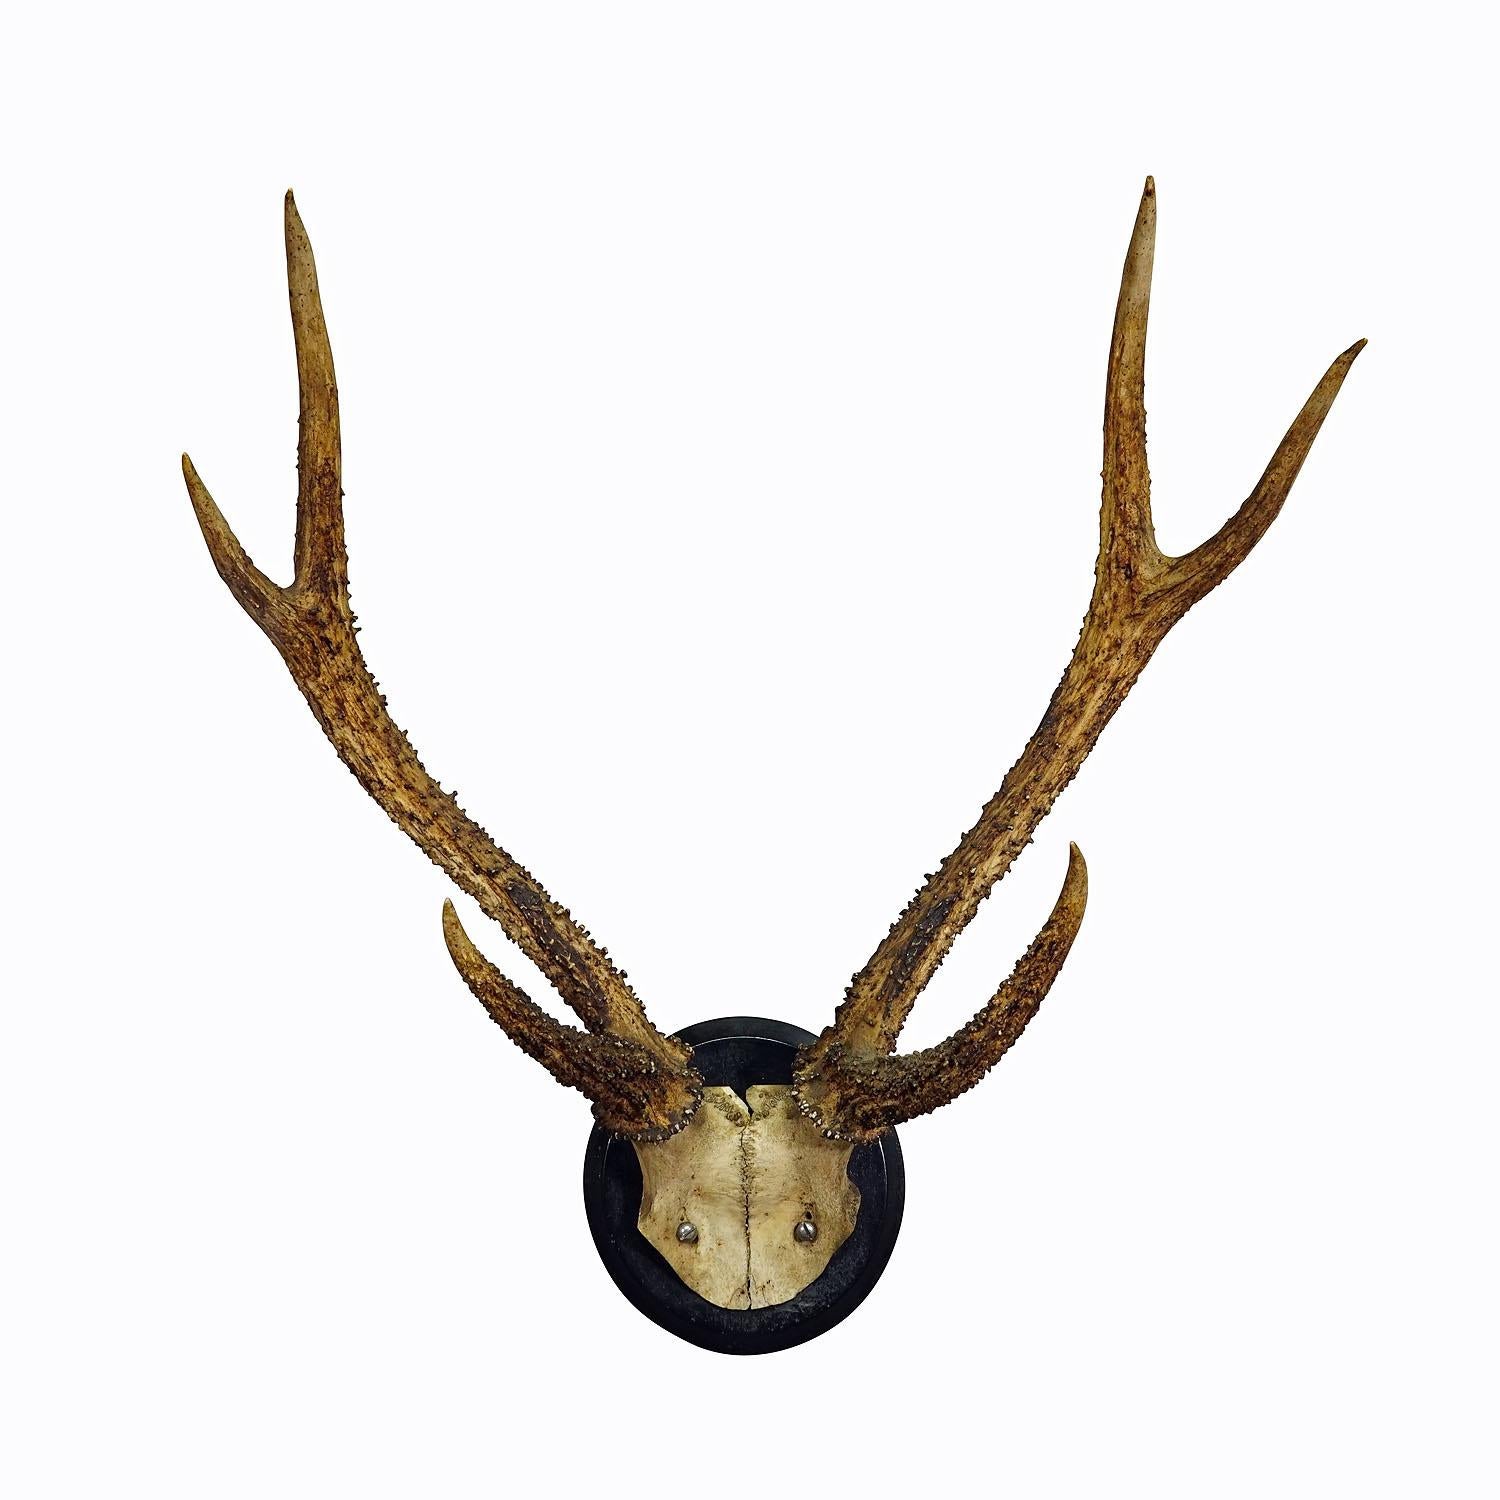 Antique Black Forest Deer Trophy on Wooden Plaque ca. 1900s

A great 6 pointer deer (Cervus elaphus) trophy from the Black Forest shot in Germany around 1900. The large antlers are mounted on a turned wall plaque with black finish.

Trophies are